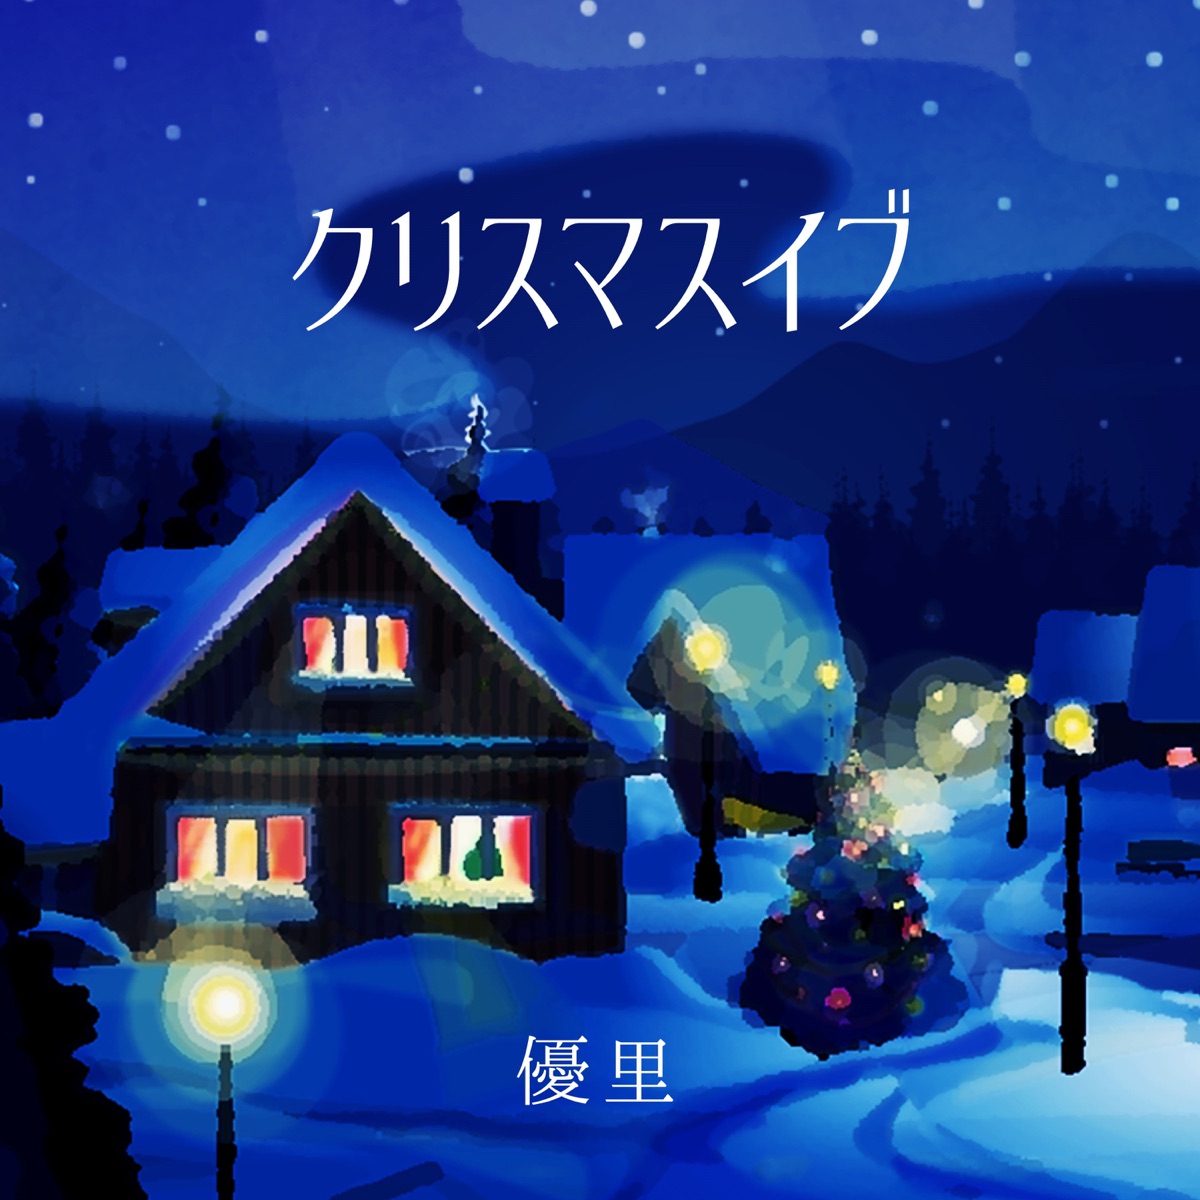 Cover art for『Yuuri - Christmas Eve』from the release『Christmas Eve』